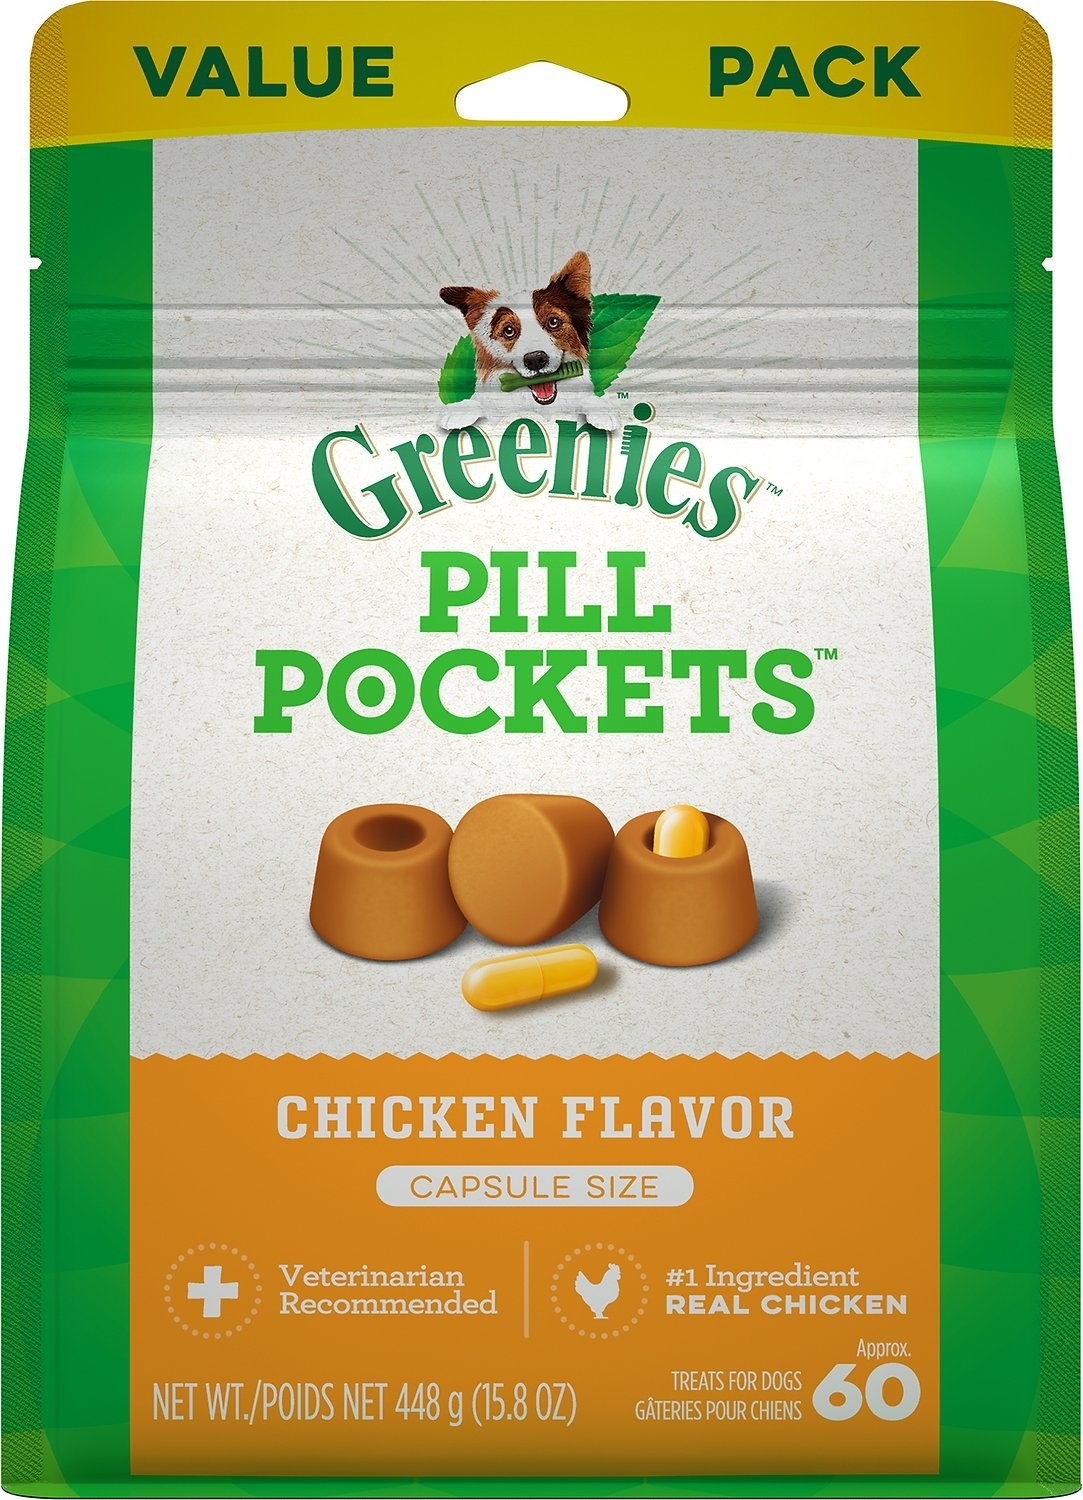 A package of the pill pockets